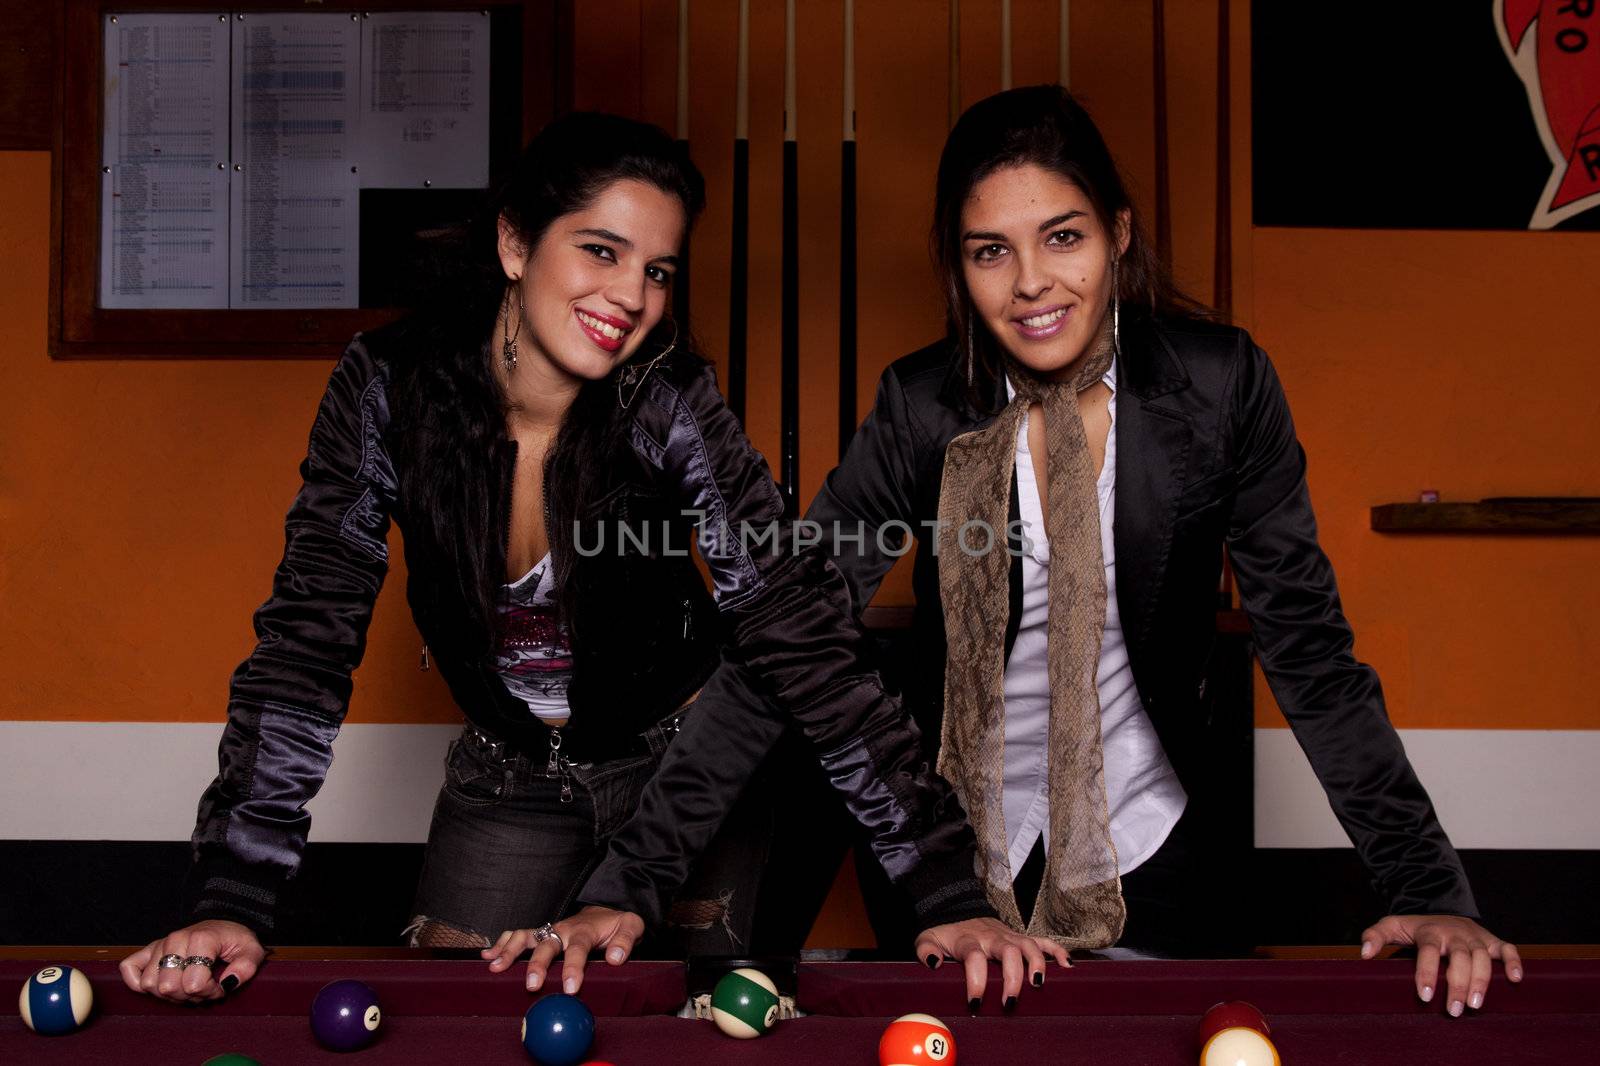 Detail view of two young girls next to a snooker table.